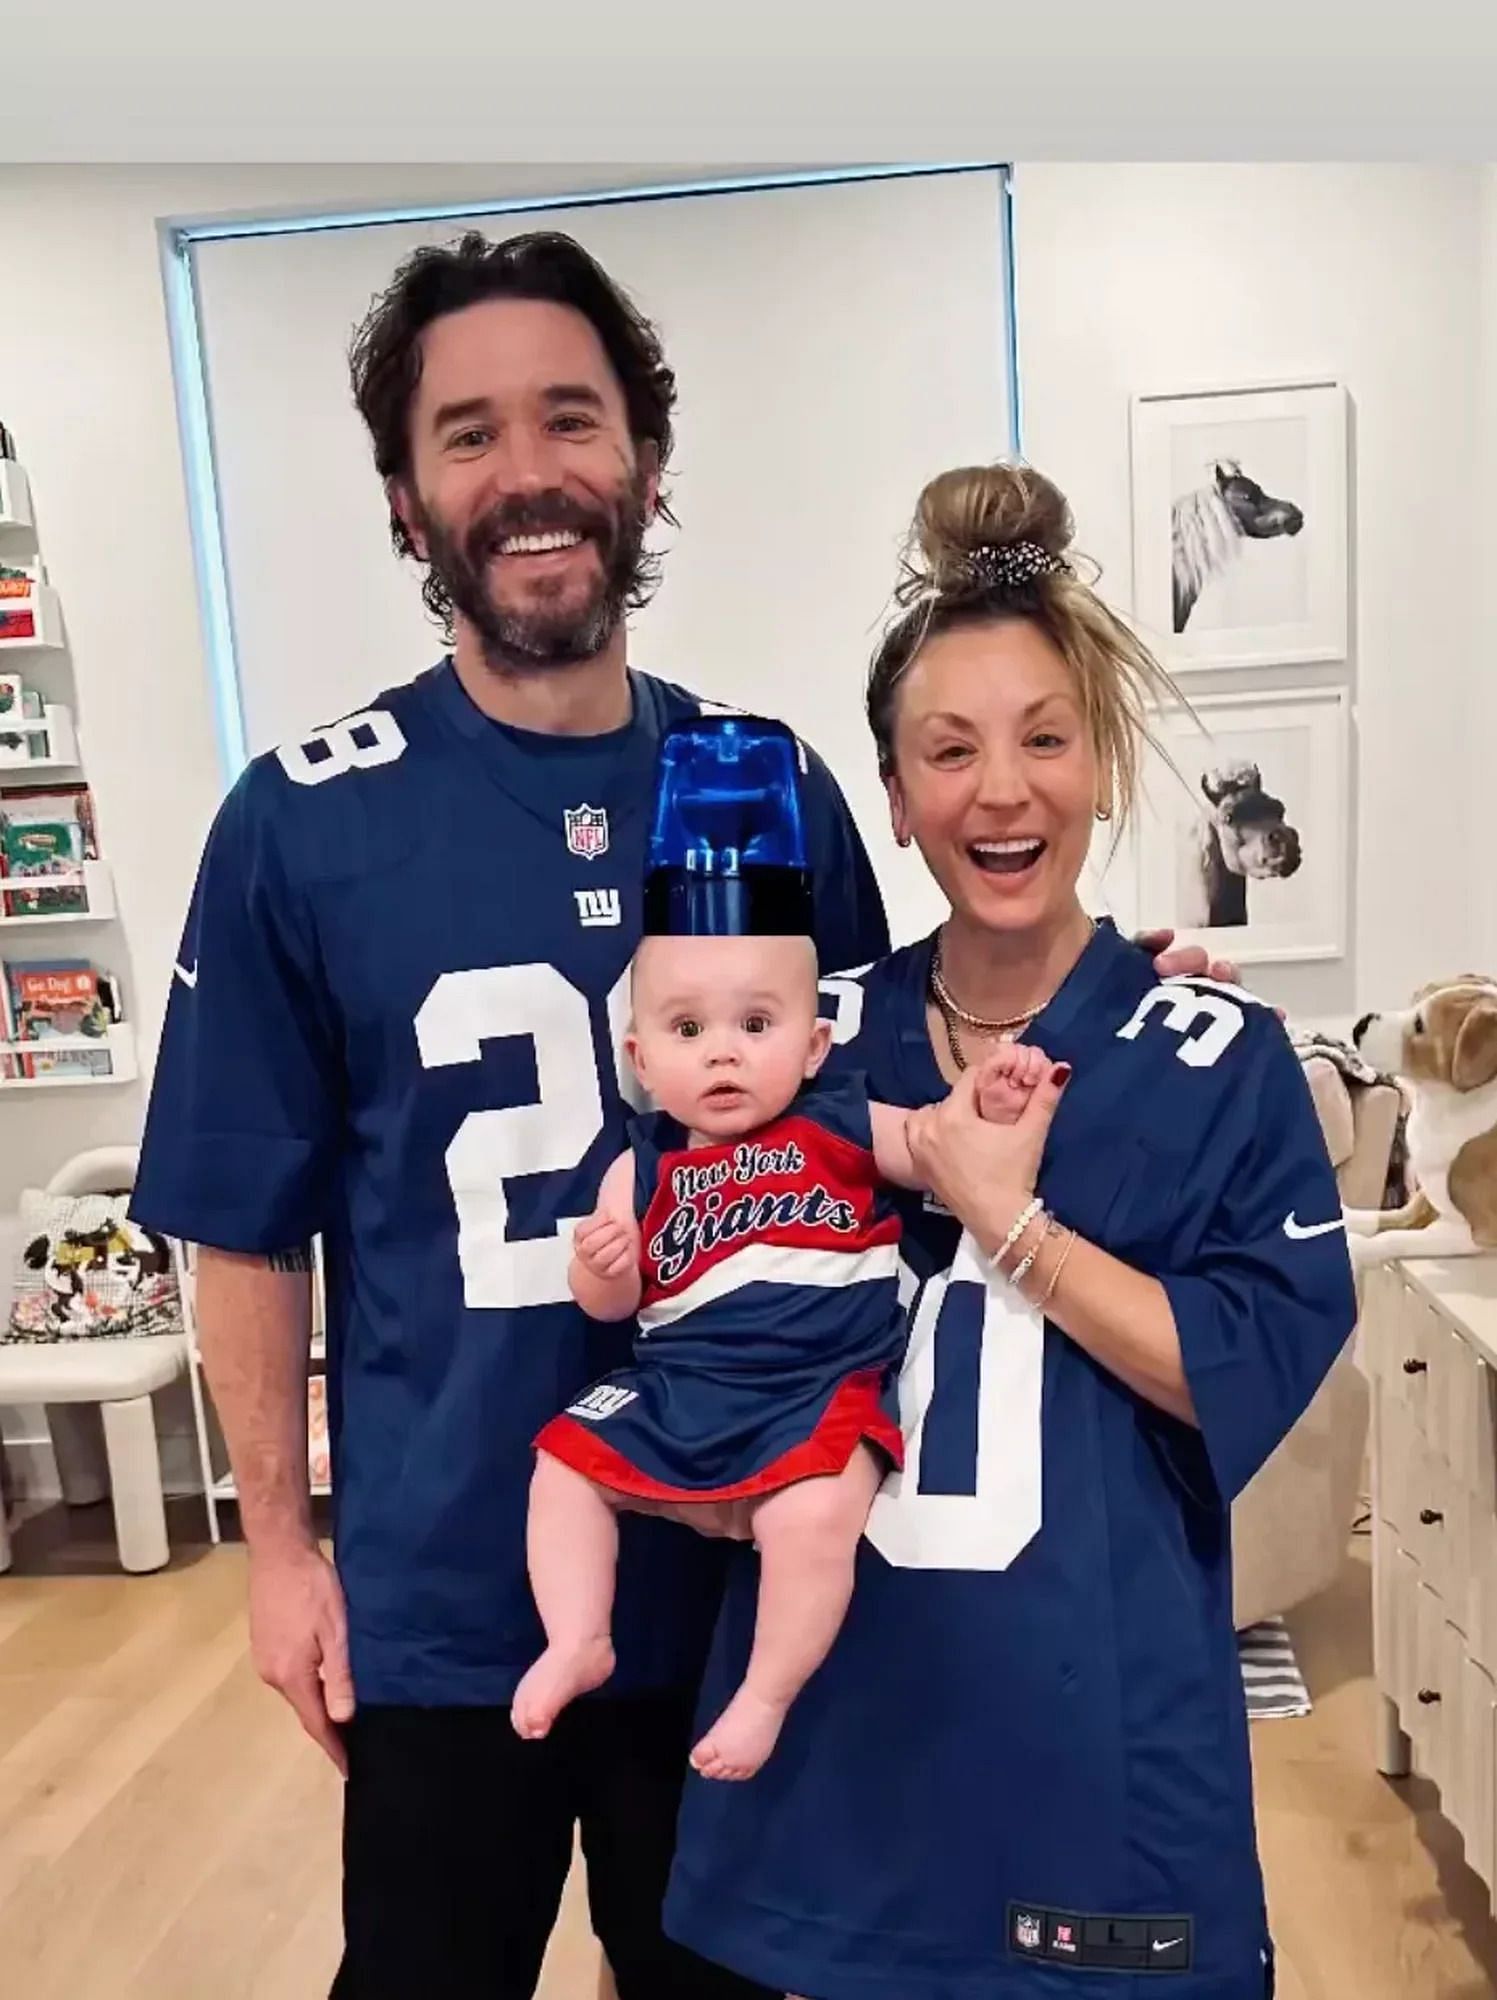 The Cuoco-Pelphrey family in New York Giants clothes